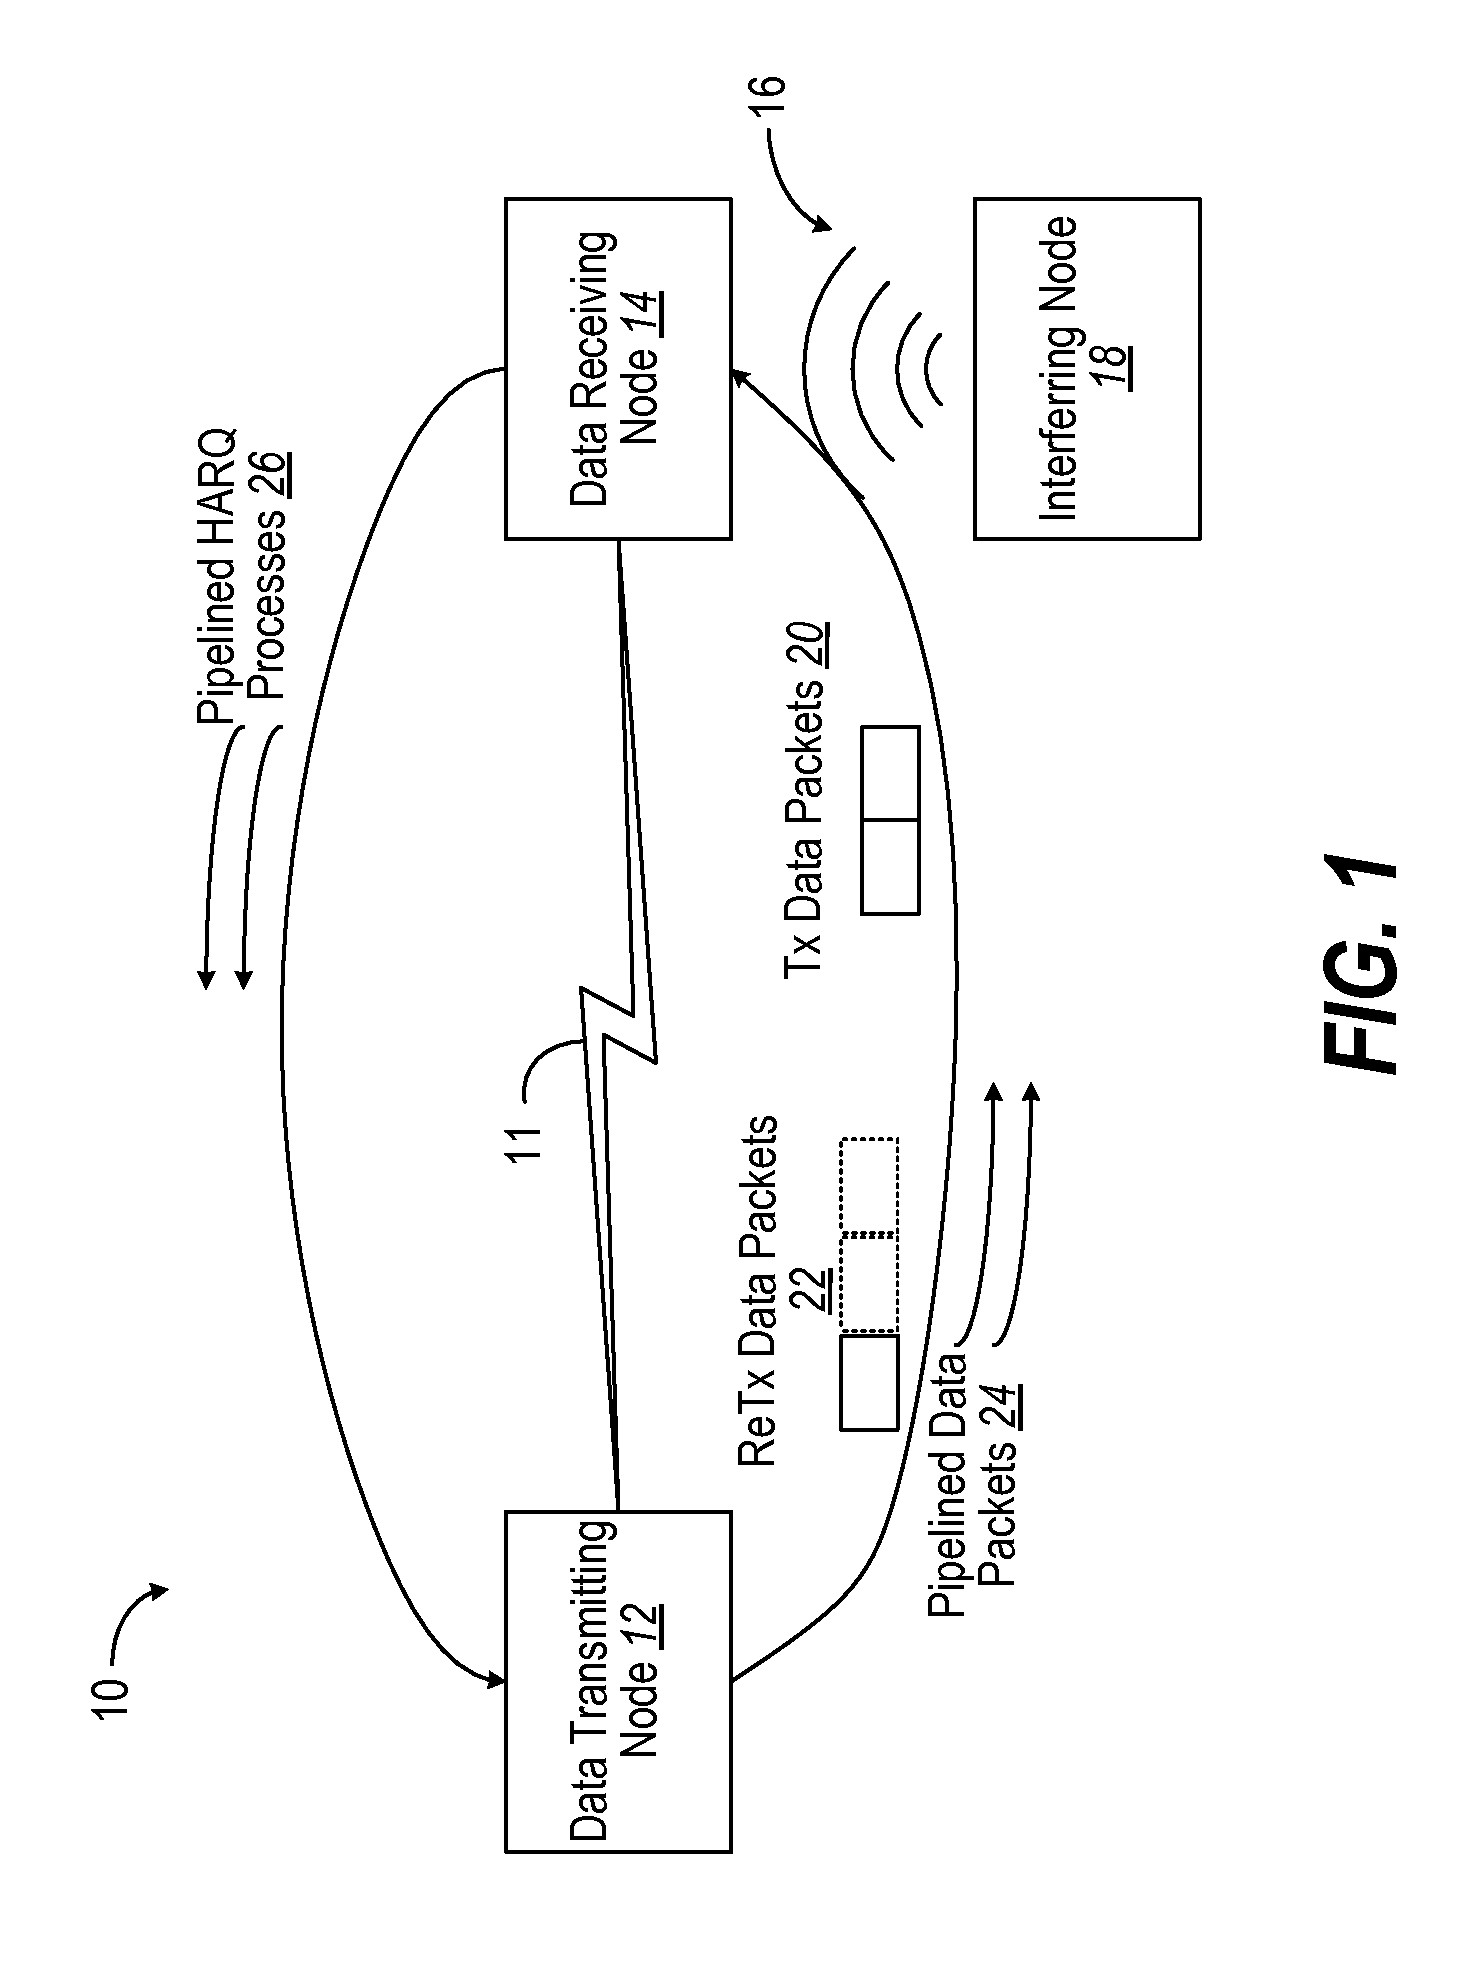 Systems and methods for uplink inter-cell interference cancellation using hybrid automatic repeat request (HARQ) retransmissions